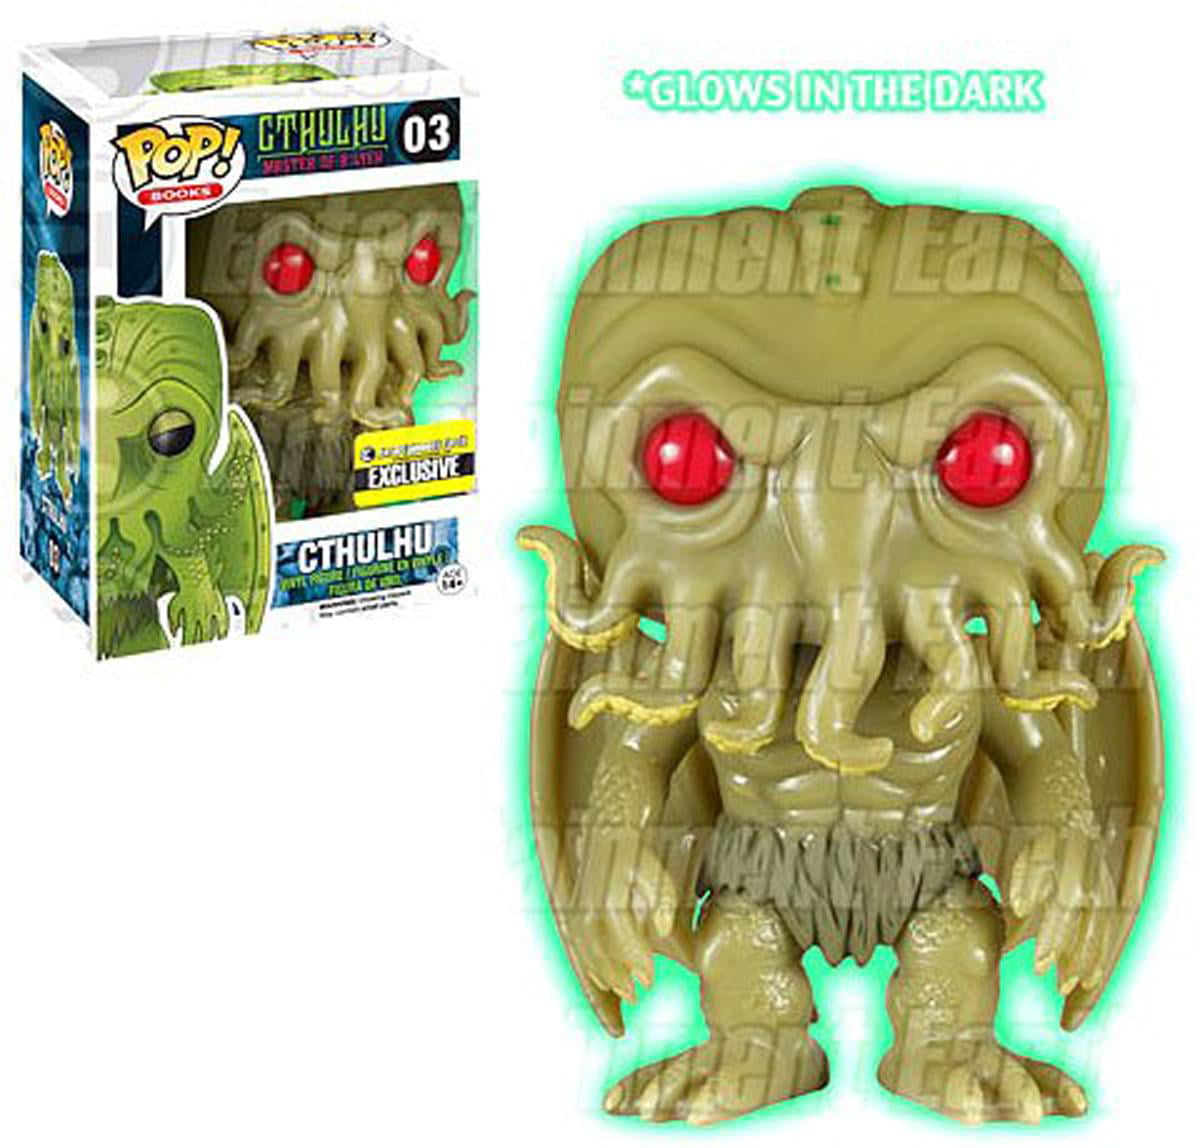 Lovecraft Cthulhu Action Figure Call of Cthulhu Vinyl Toy Model Funko Pop 